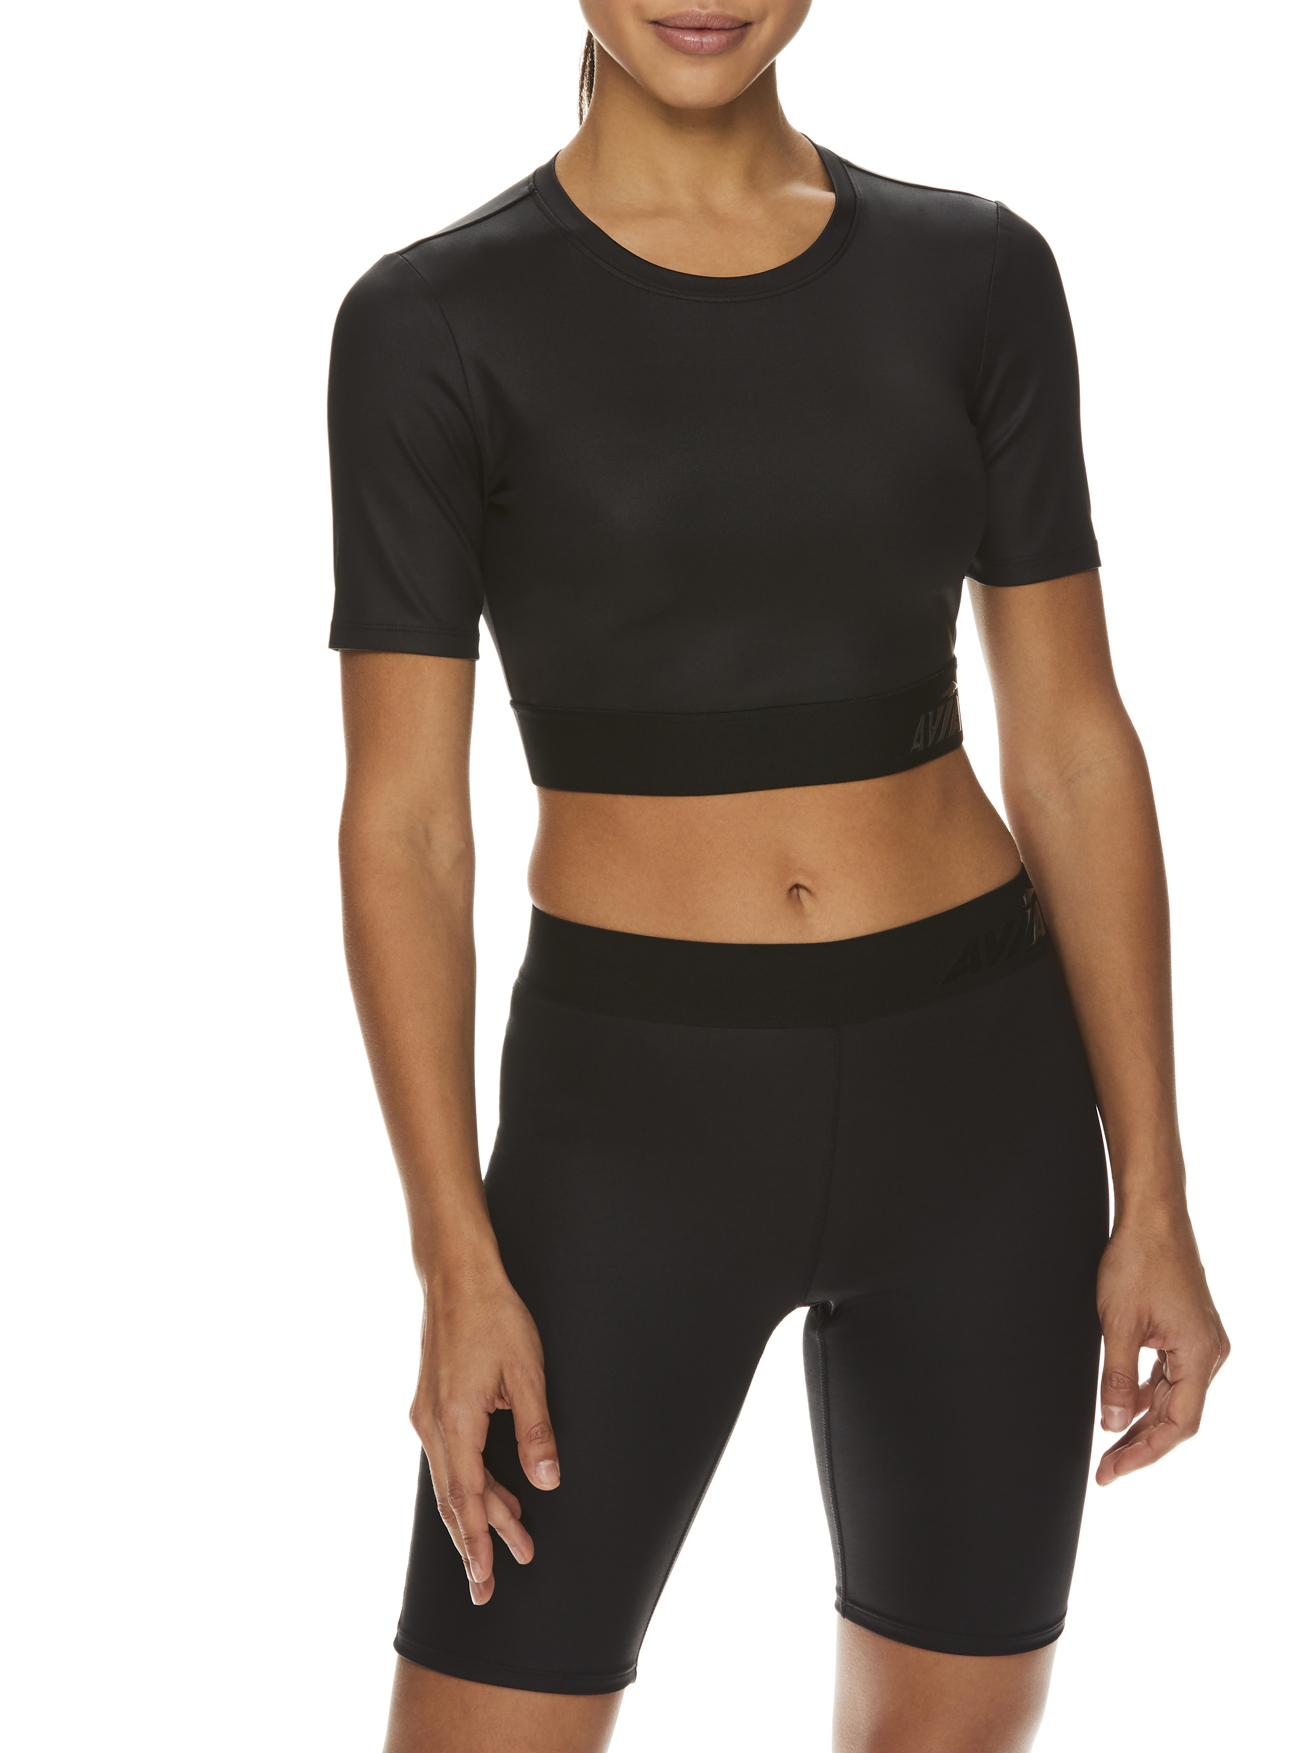 Avia Women's Active Ready Set Glow Cropped Tee - image 1 of 4